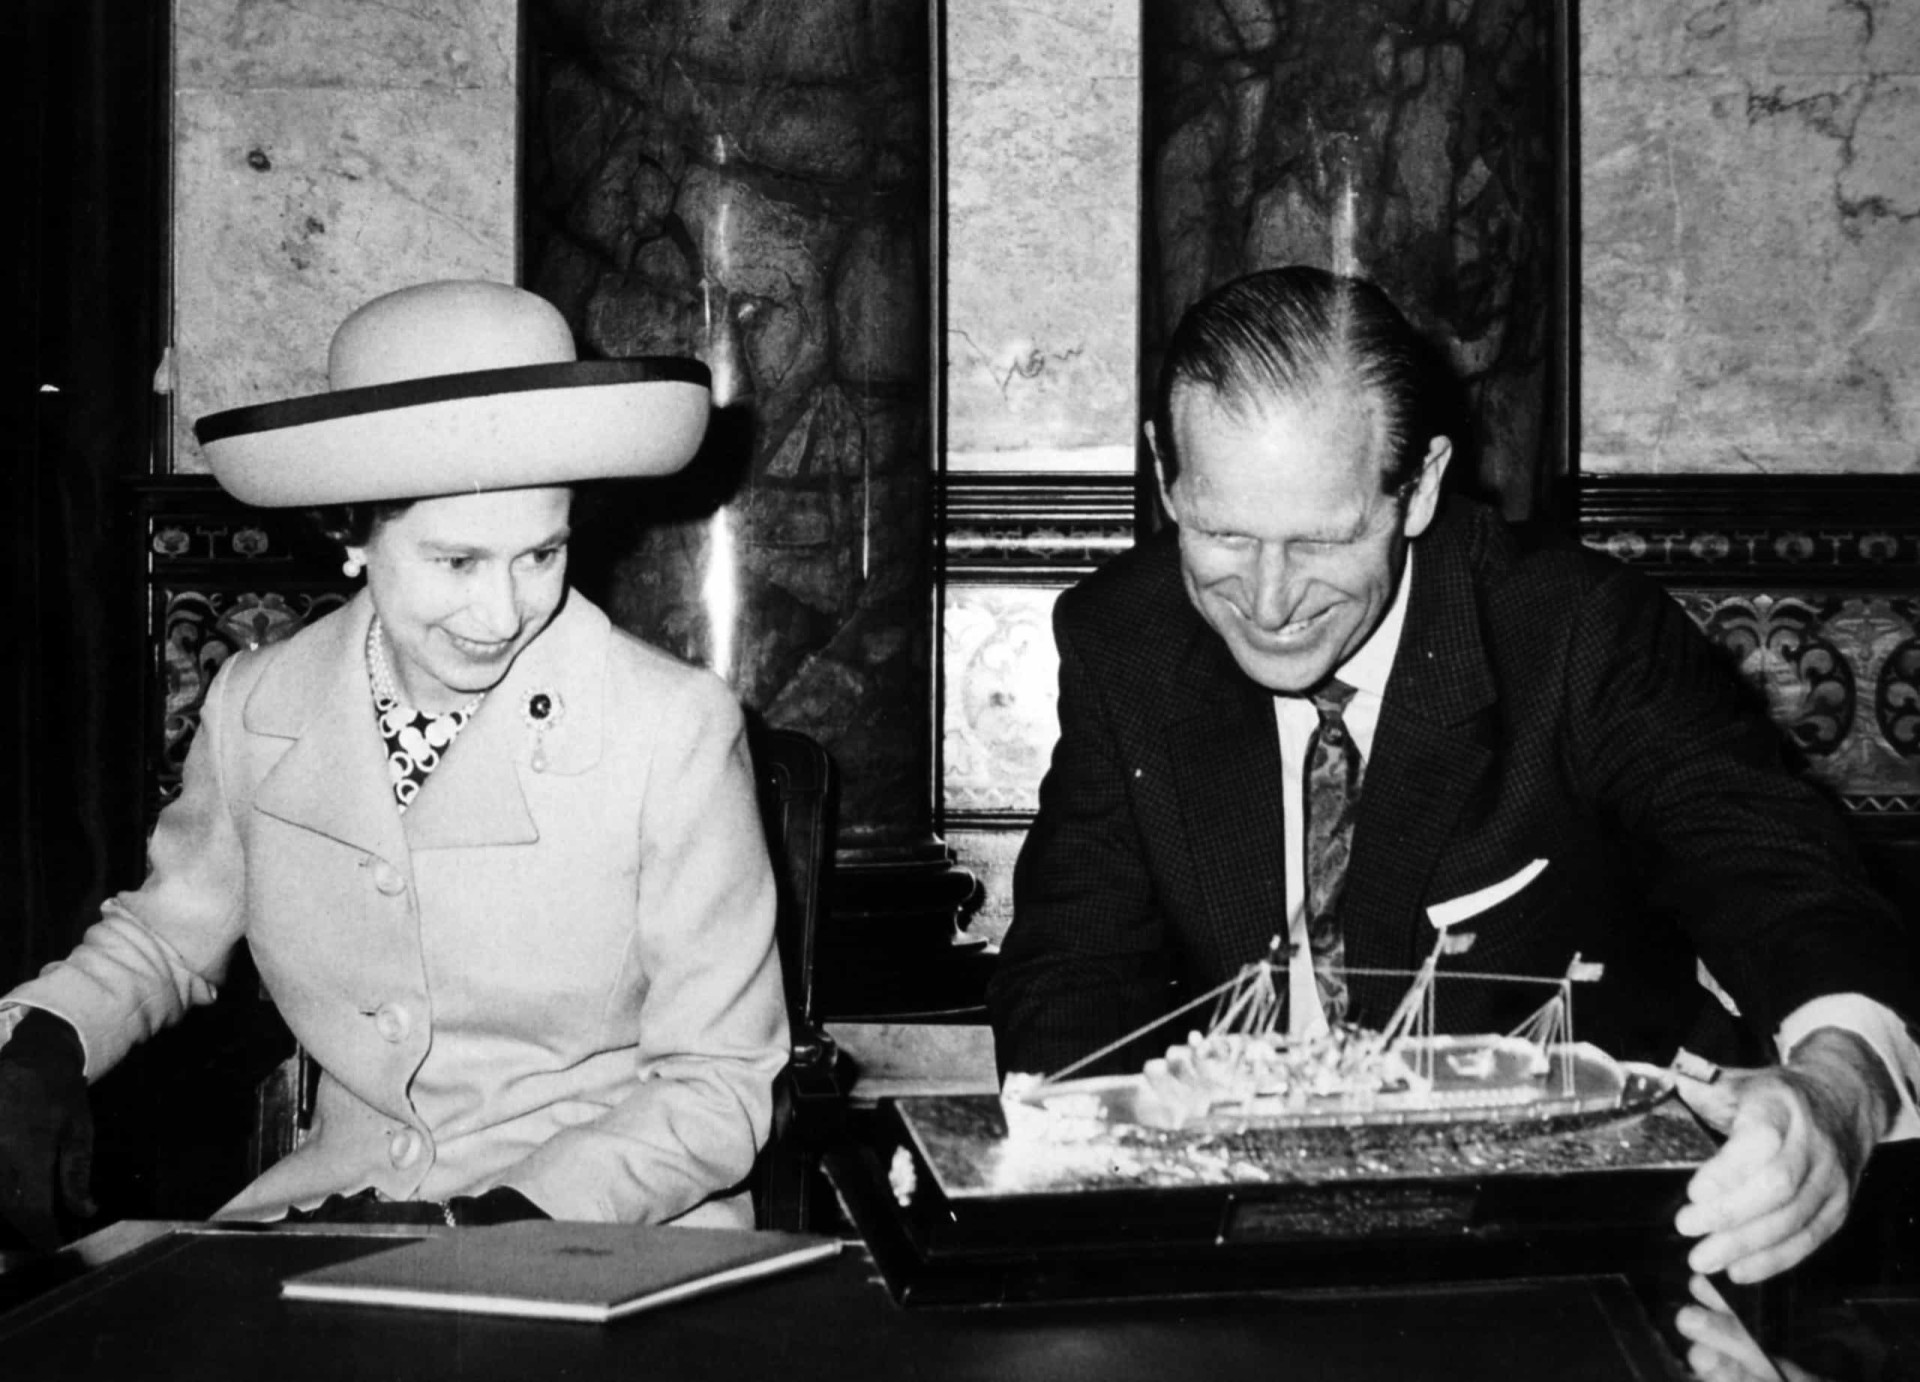 <p>Queen Elizabeth II and the Duke of Edinburgh admire a gift received after the monarch opened the new accommodation of Lloyd's Register of Shipping at the society's City of London headquarters. The gift was a silver model replica of the Royal Yacht <em>Britannia</em>.</p><p>You may also like:<a href="https://www.starsinsider.com/n/339710?utm_source=msn.com&utm_medium=display&utm_campaign=referral_description&utm_content=474709v3en-ph"> Bugshots: insects as you've never seen them before!</a></p>